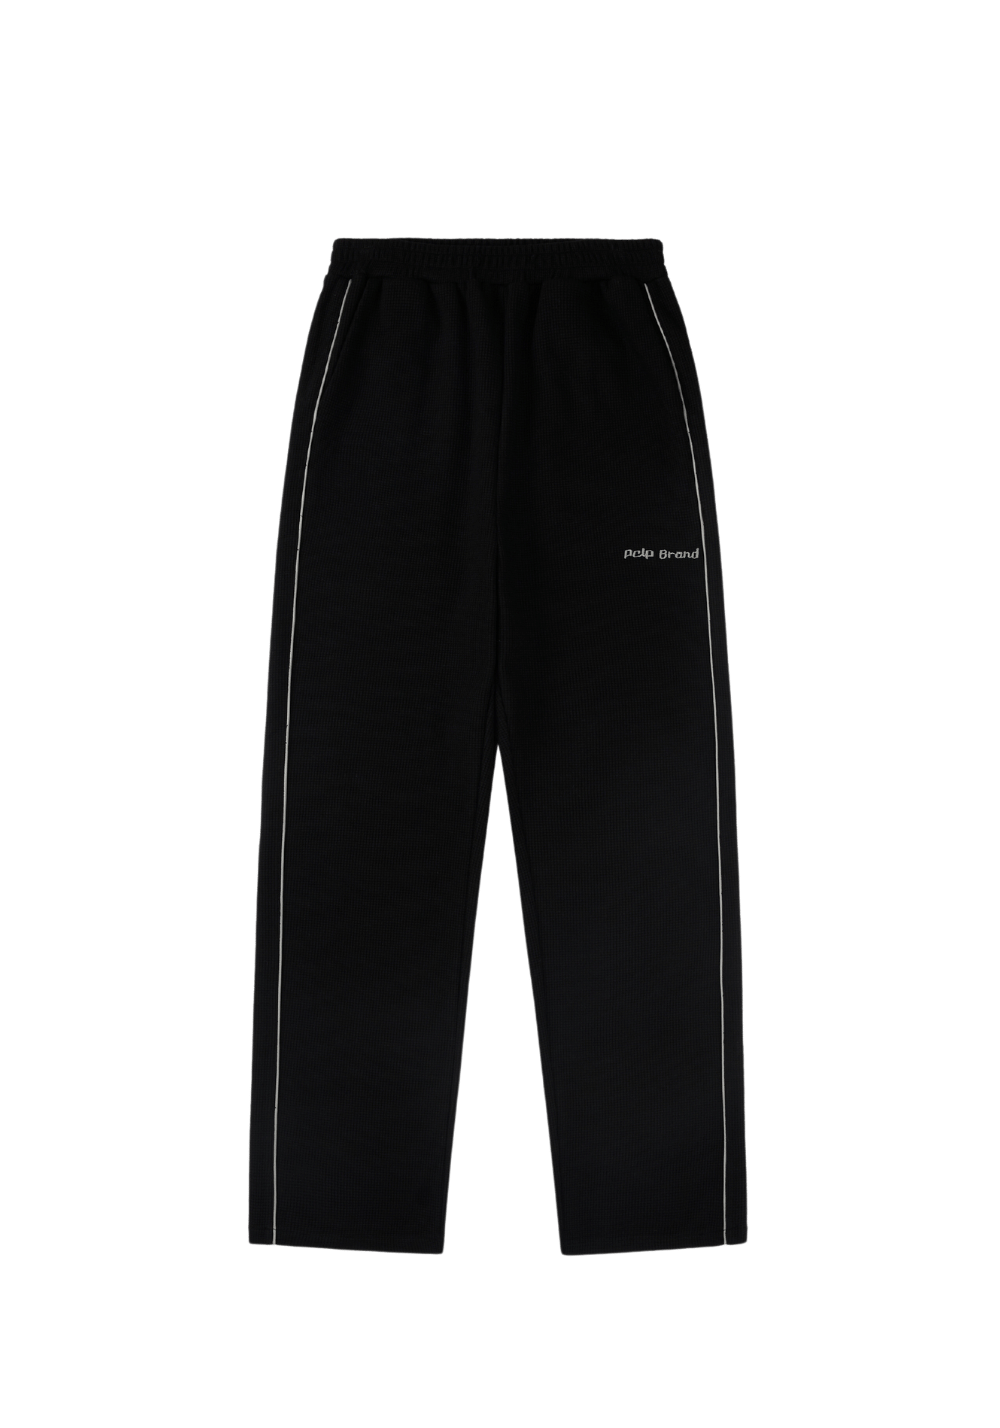 Embroidered Houndstooth Sweatpant - PSYLOS 1, Embroidered Houndstooth Sweatpant, Pants, PCLP, PSYLOS 1